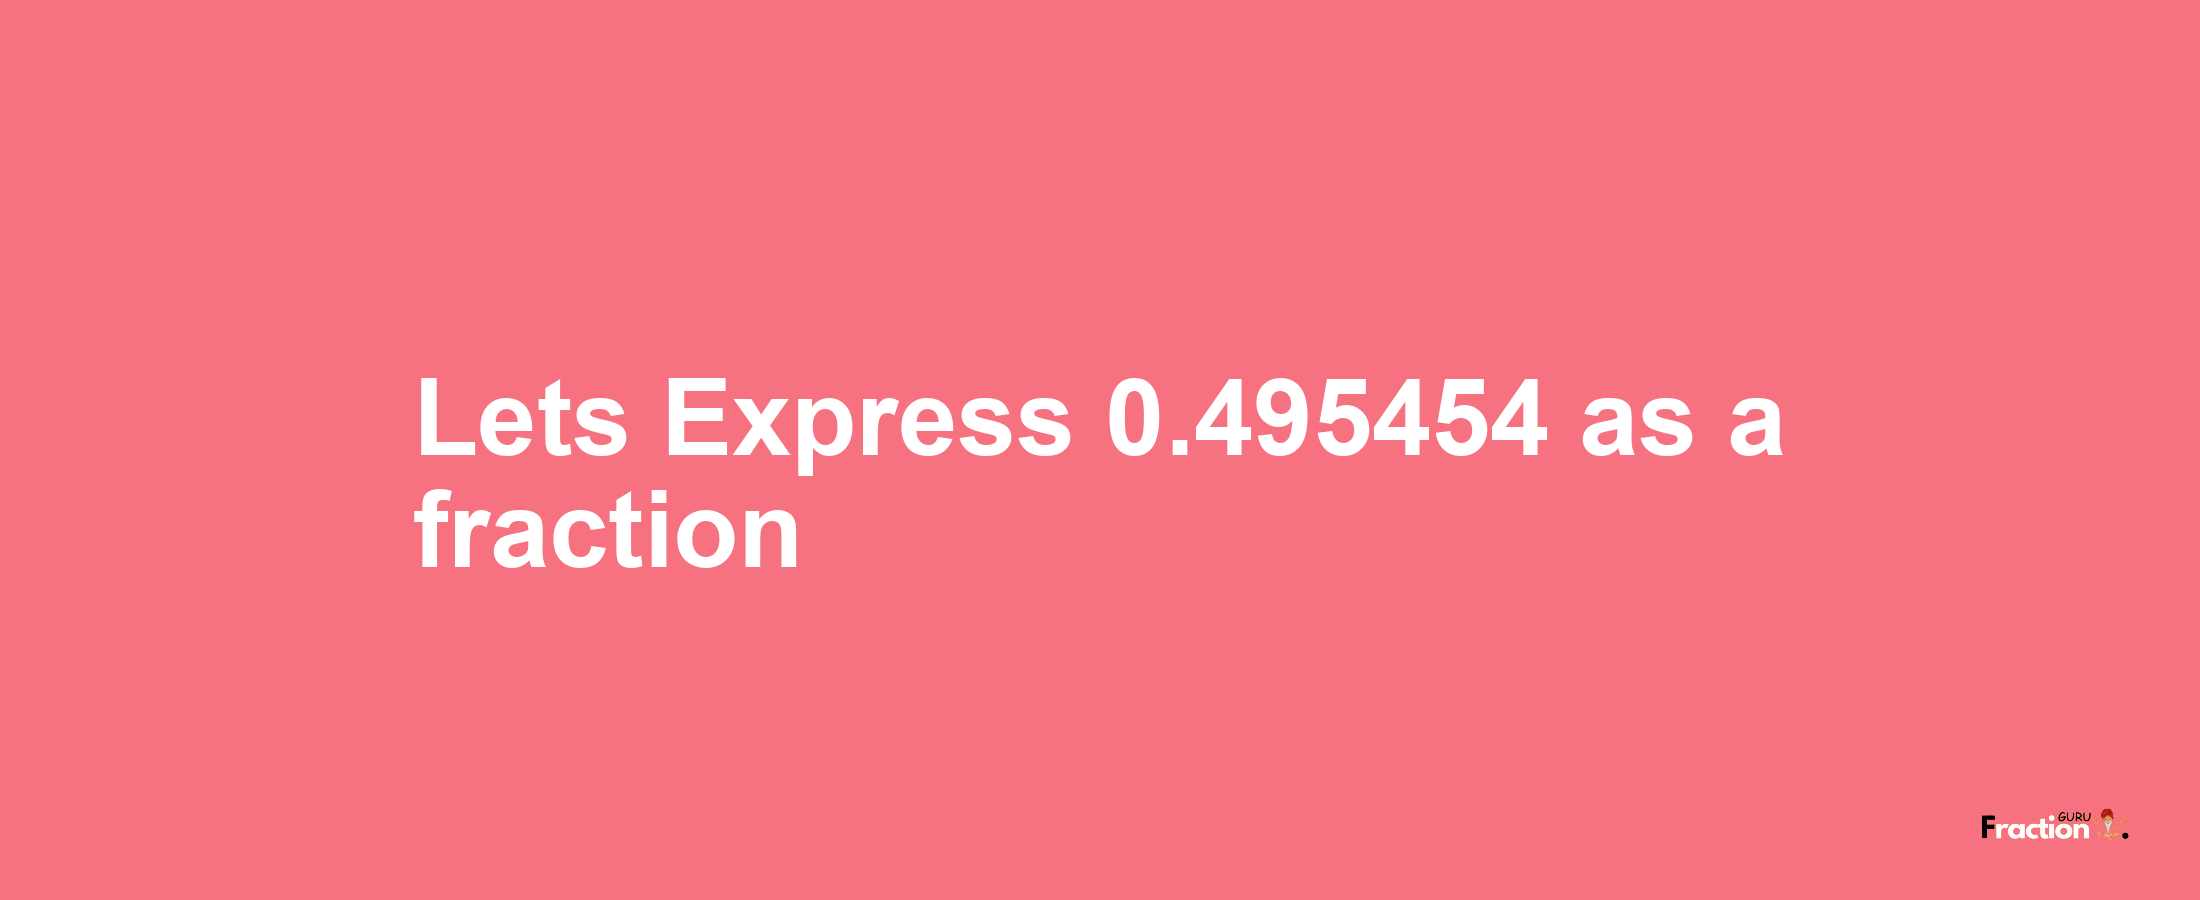 Lets Express 0.495454 as afraction